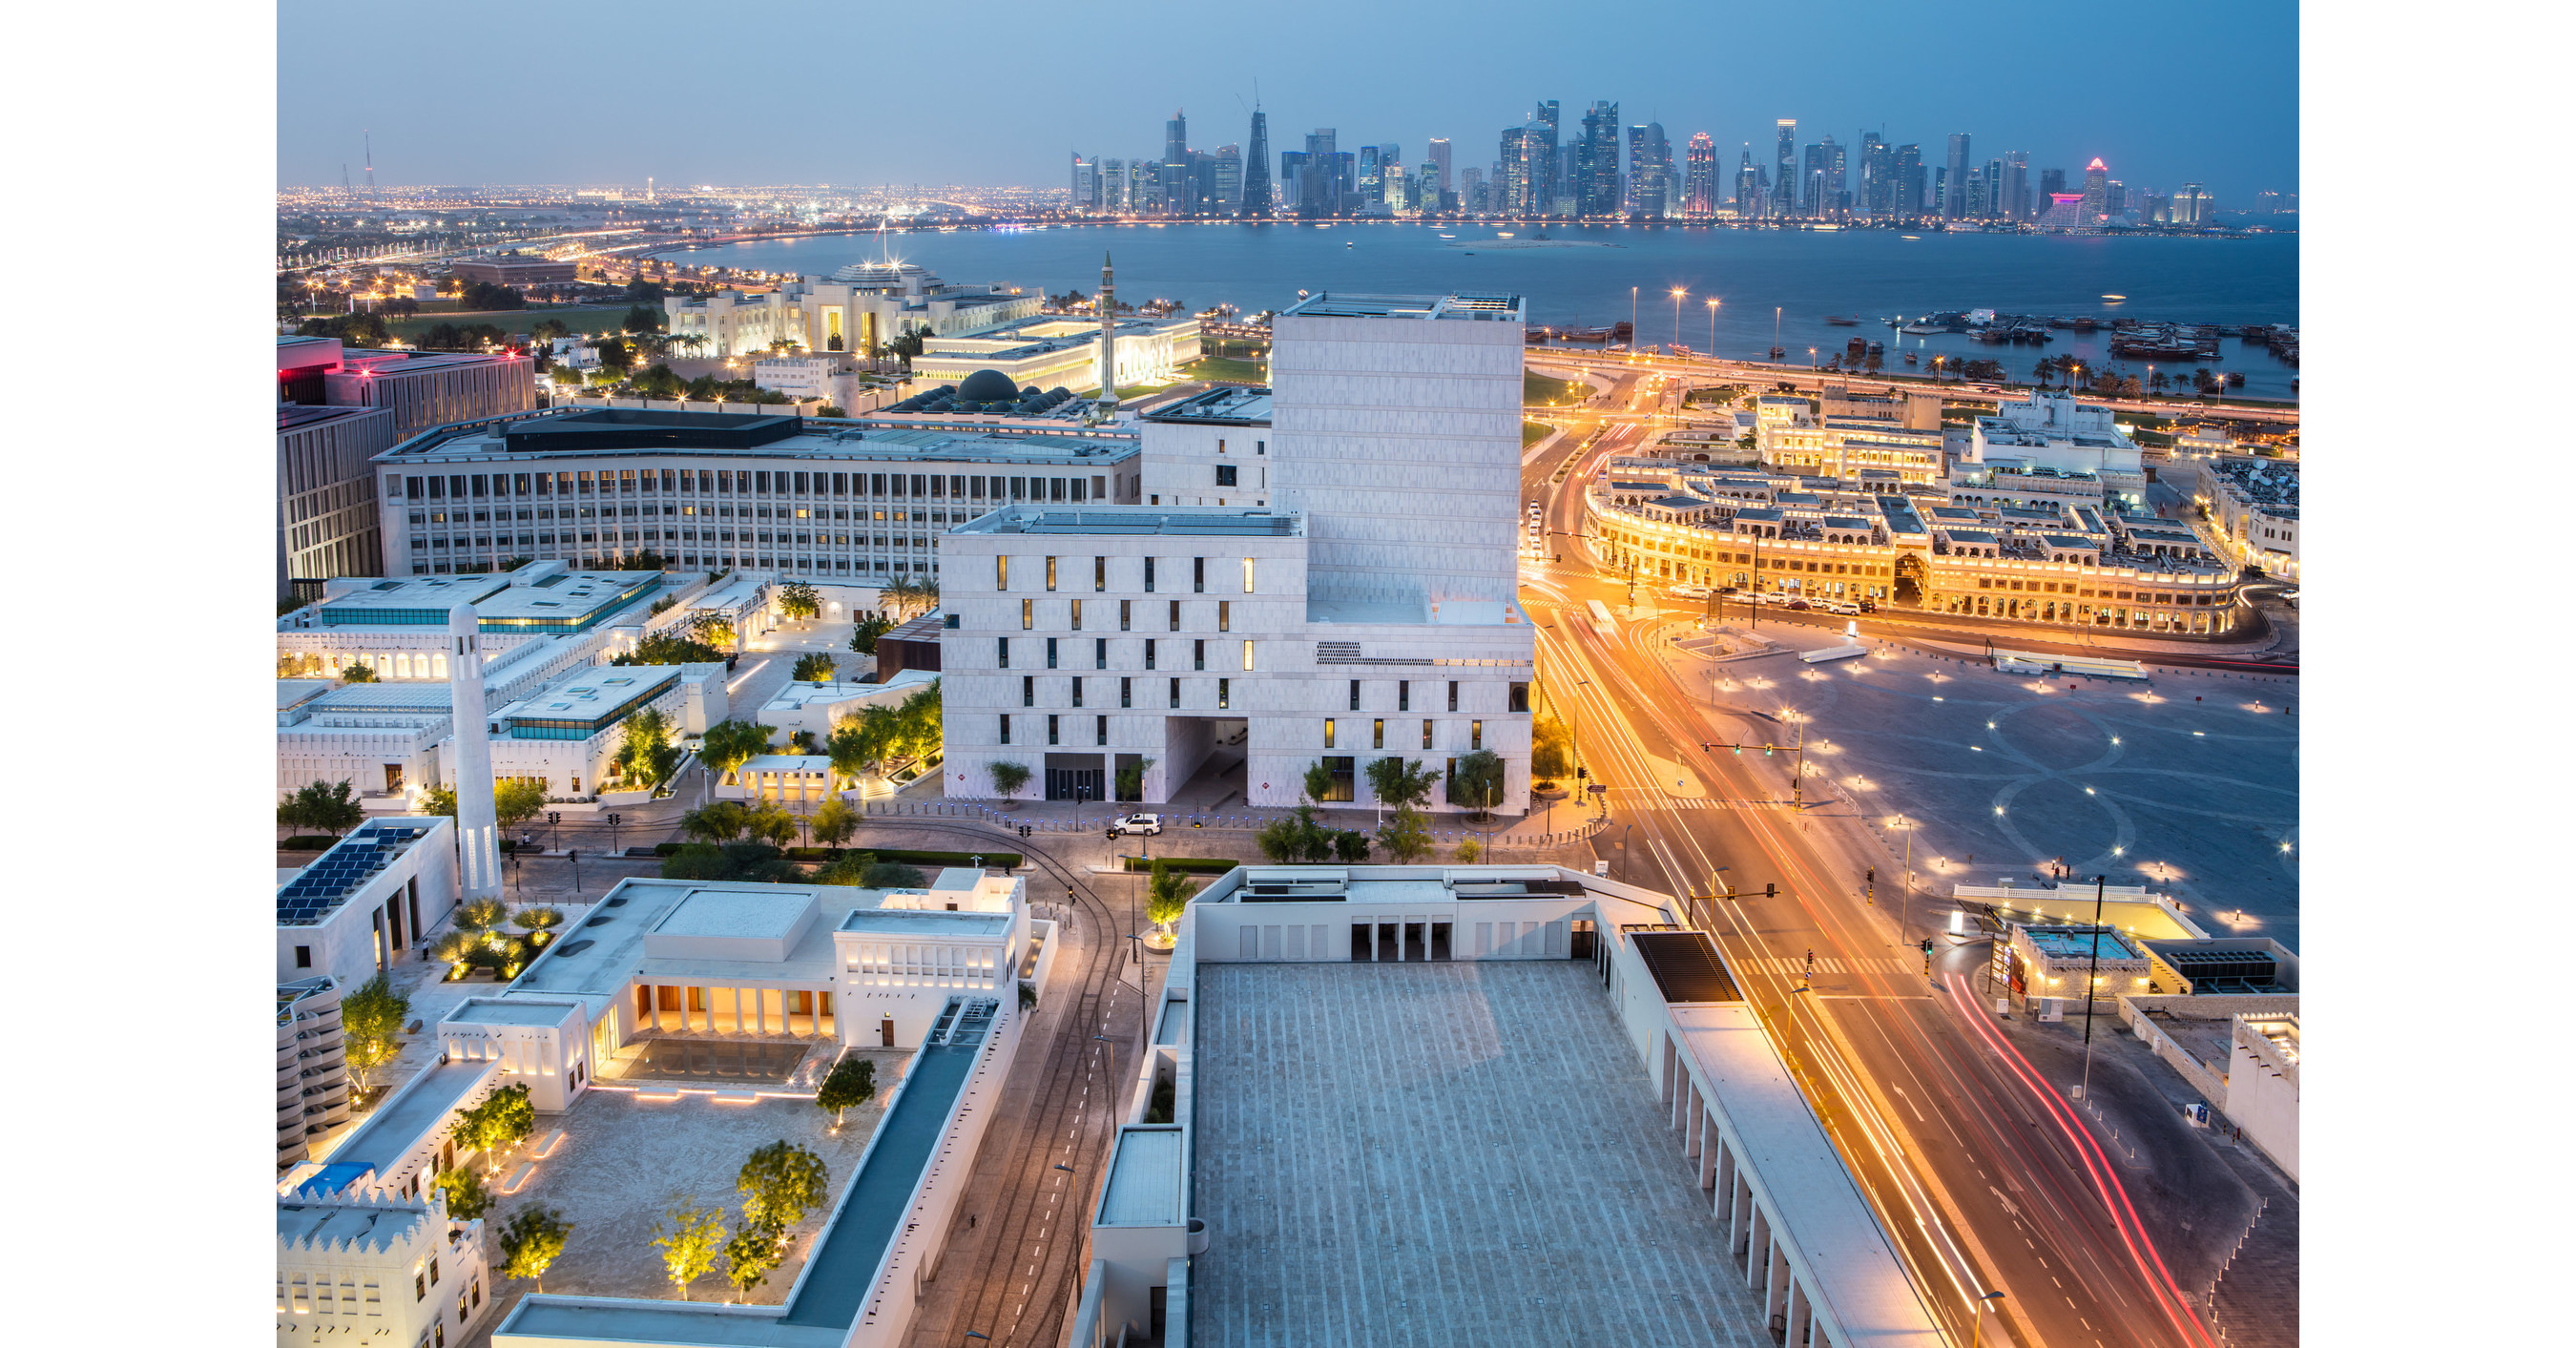 Smart City Expo Doha 2022 will address the main challenges facing the